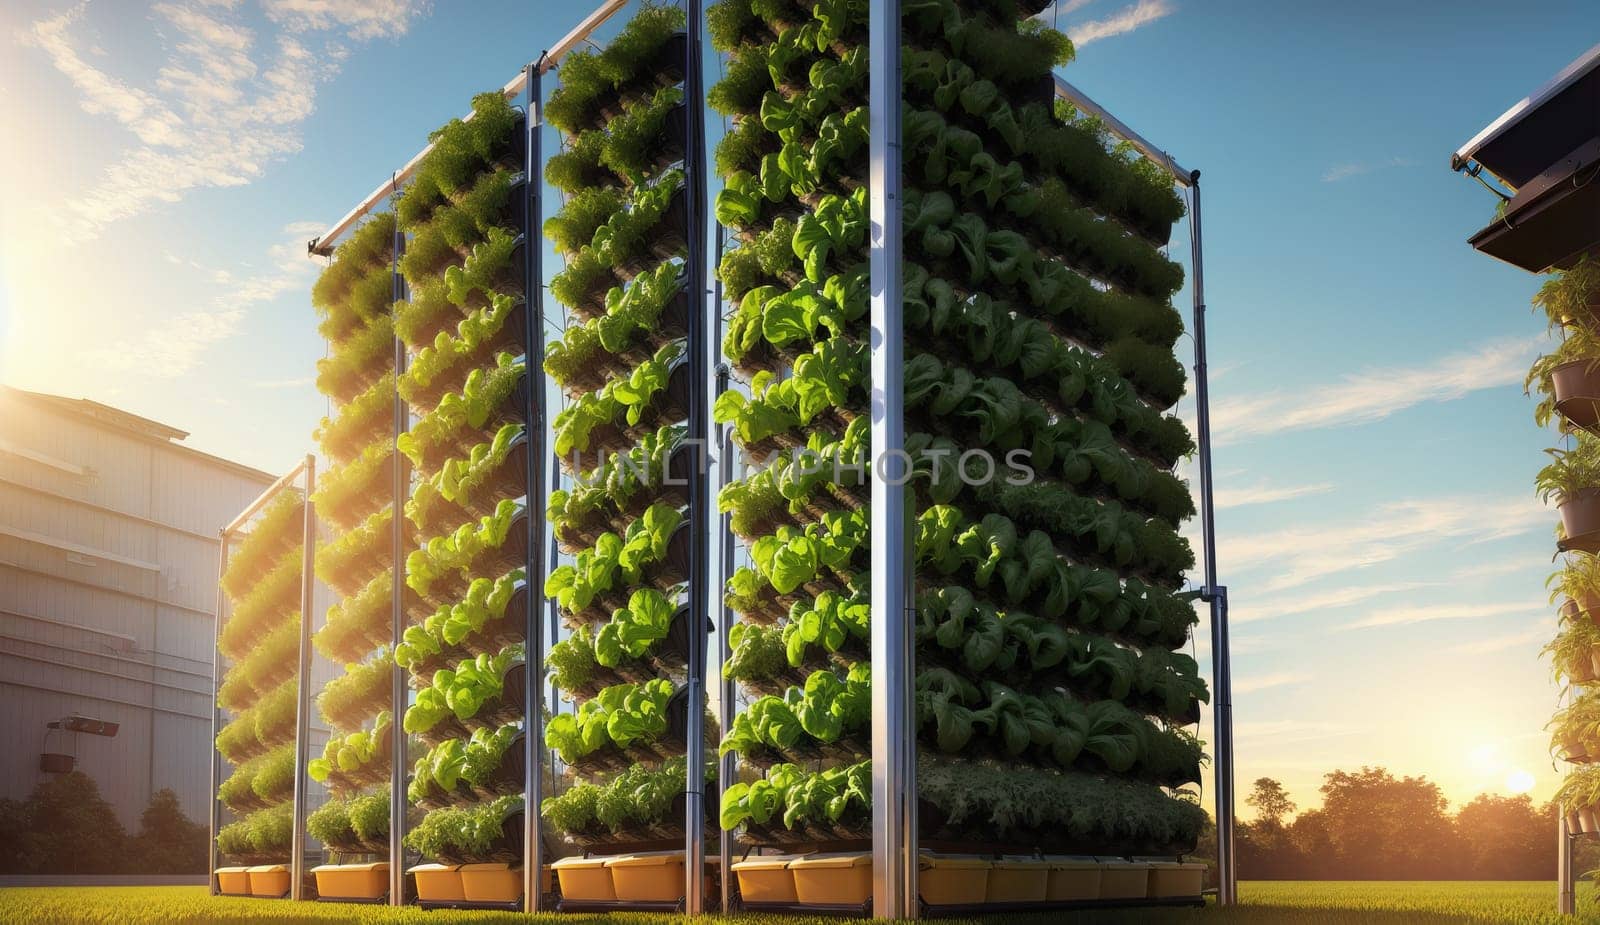 Vertical garden on city building with plants, trees, and grass by DCStudio